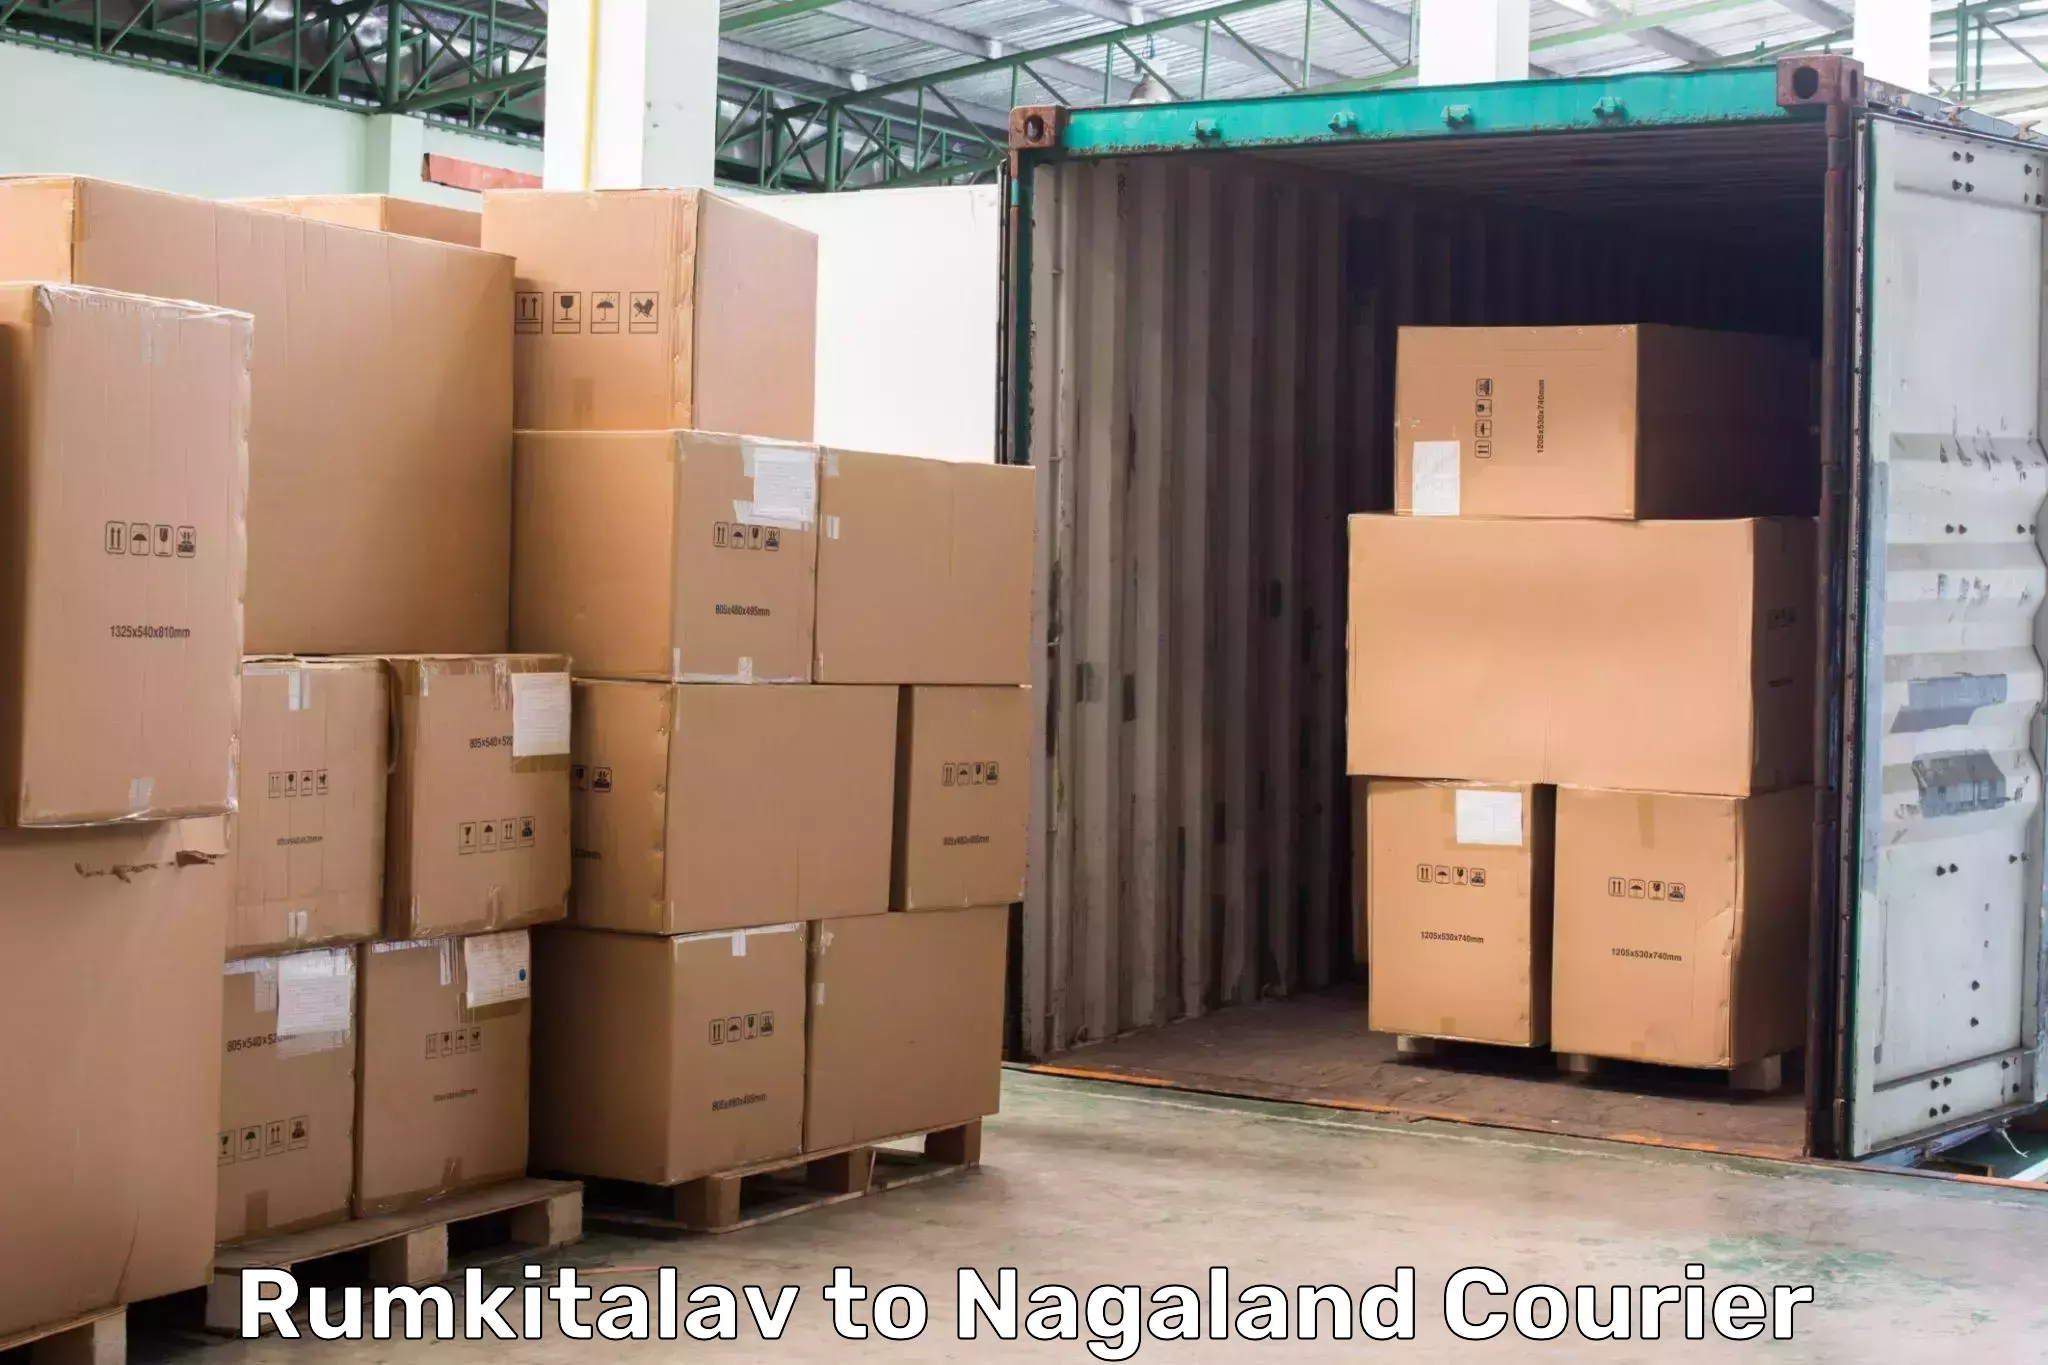 Express delivery network Rumkitalav to NIT Nagaland